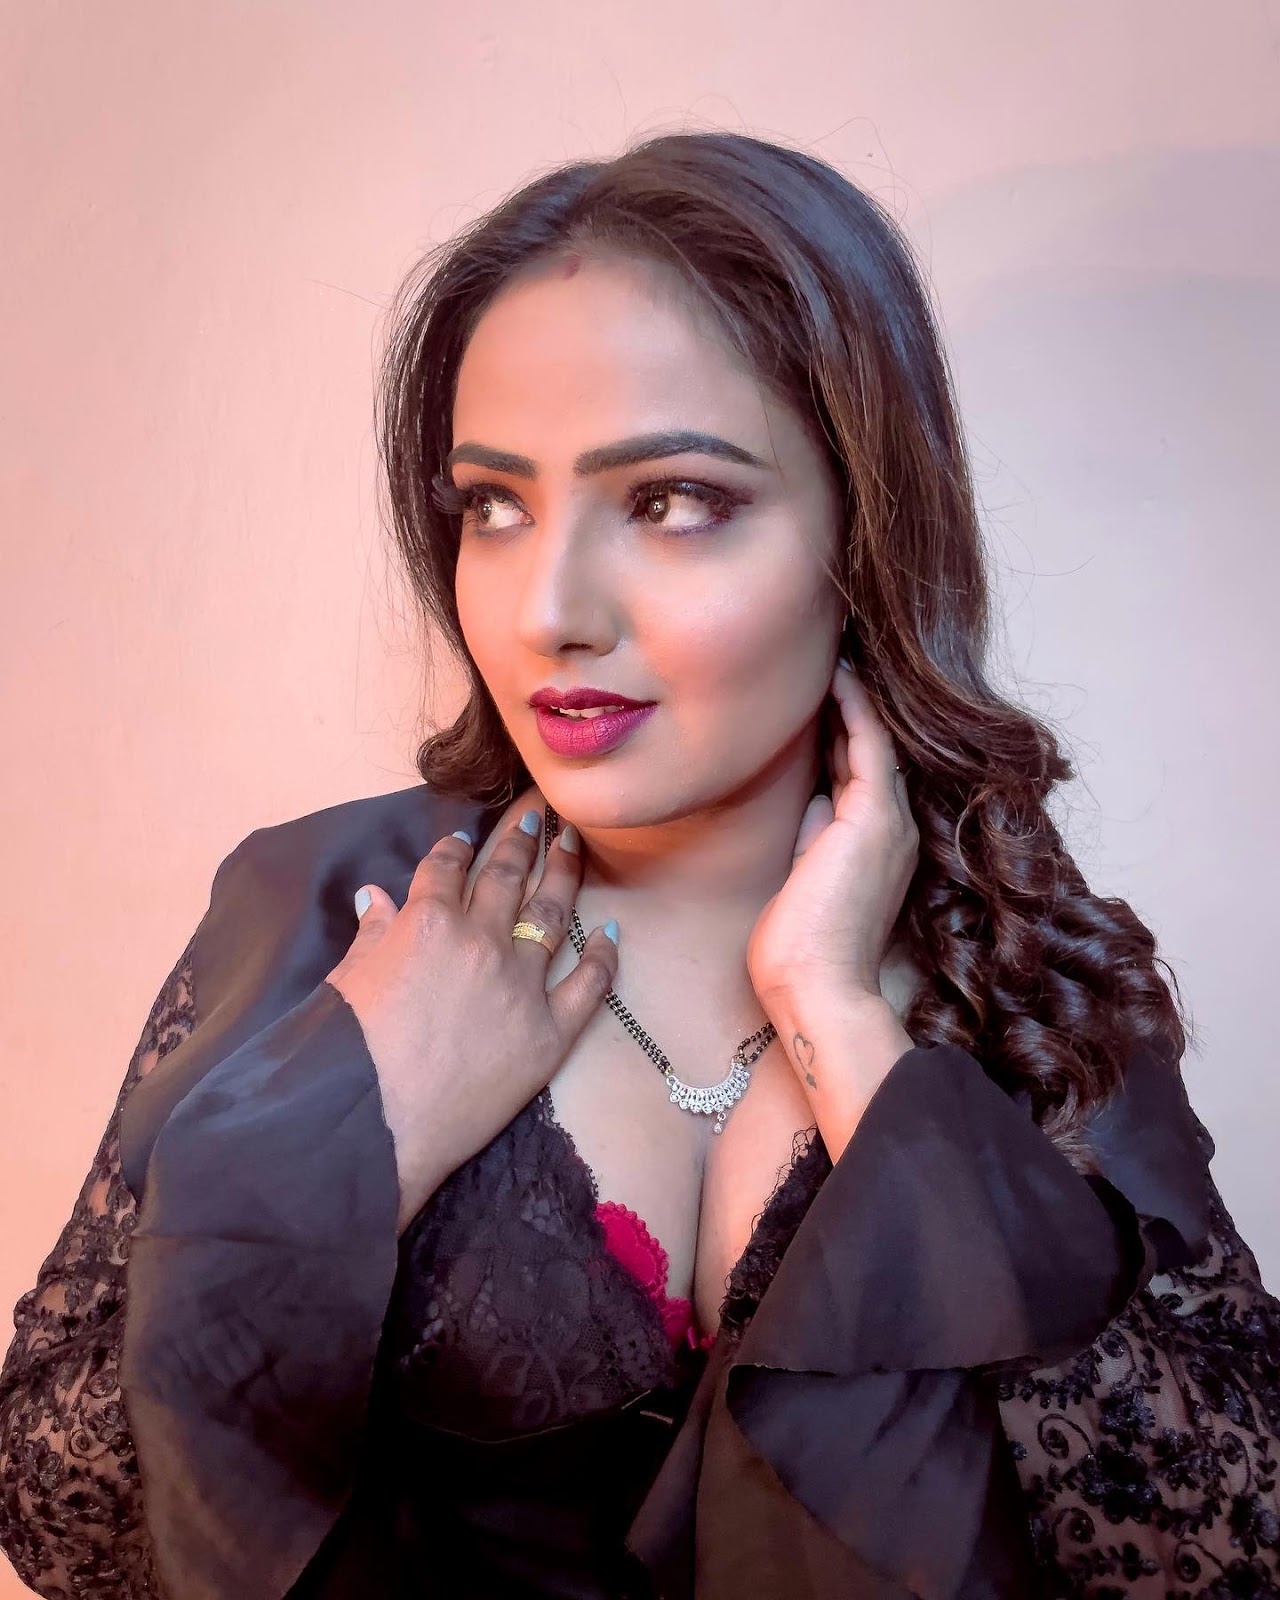 shyna khatri cleavage night gown web series actress